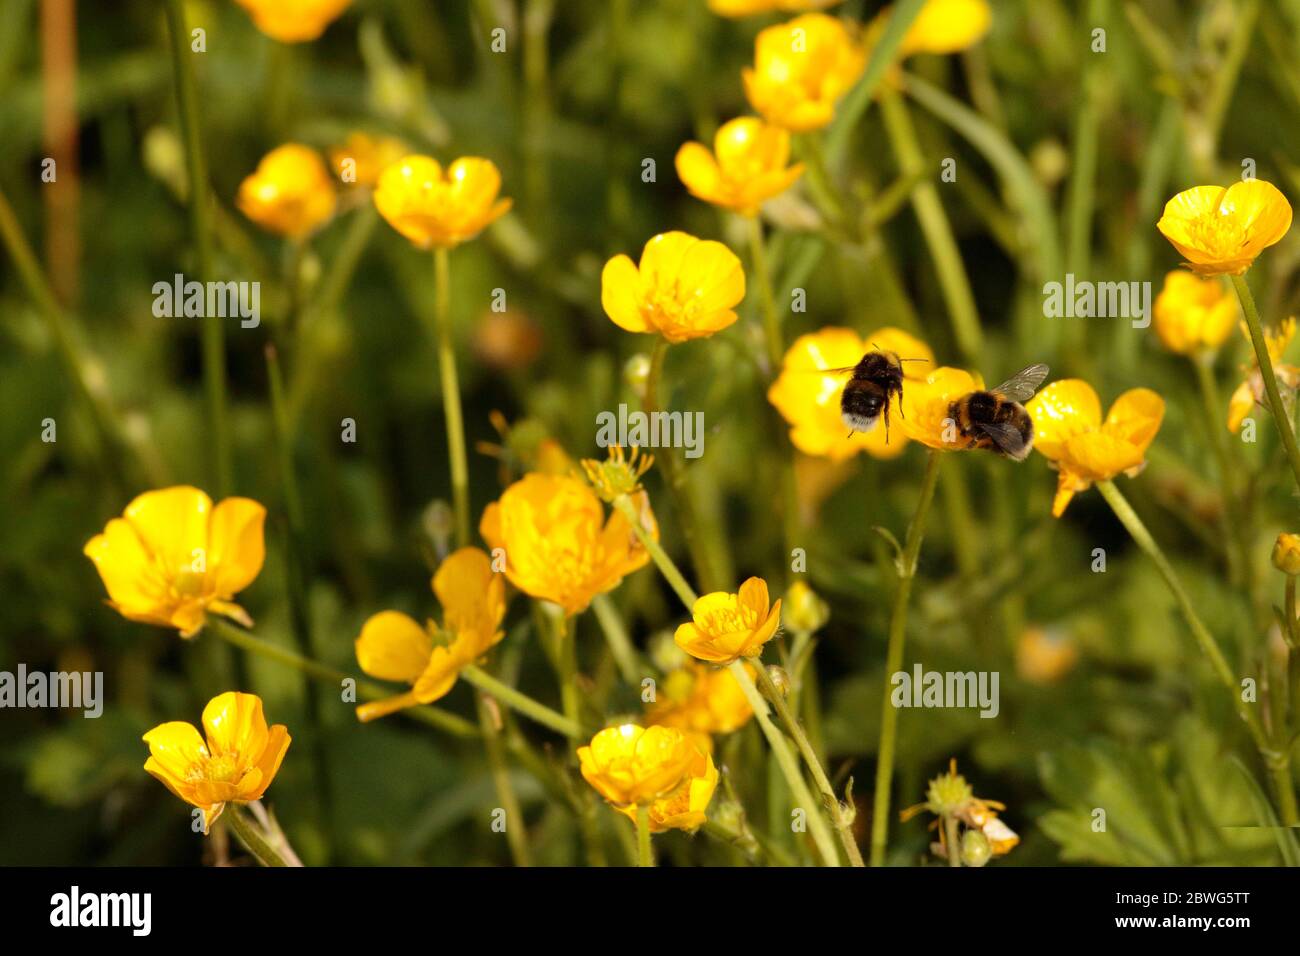 Bumblebee foraging on Buttercup pollen and nectar Stock Photo